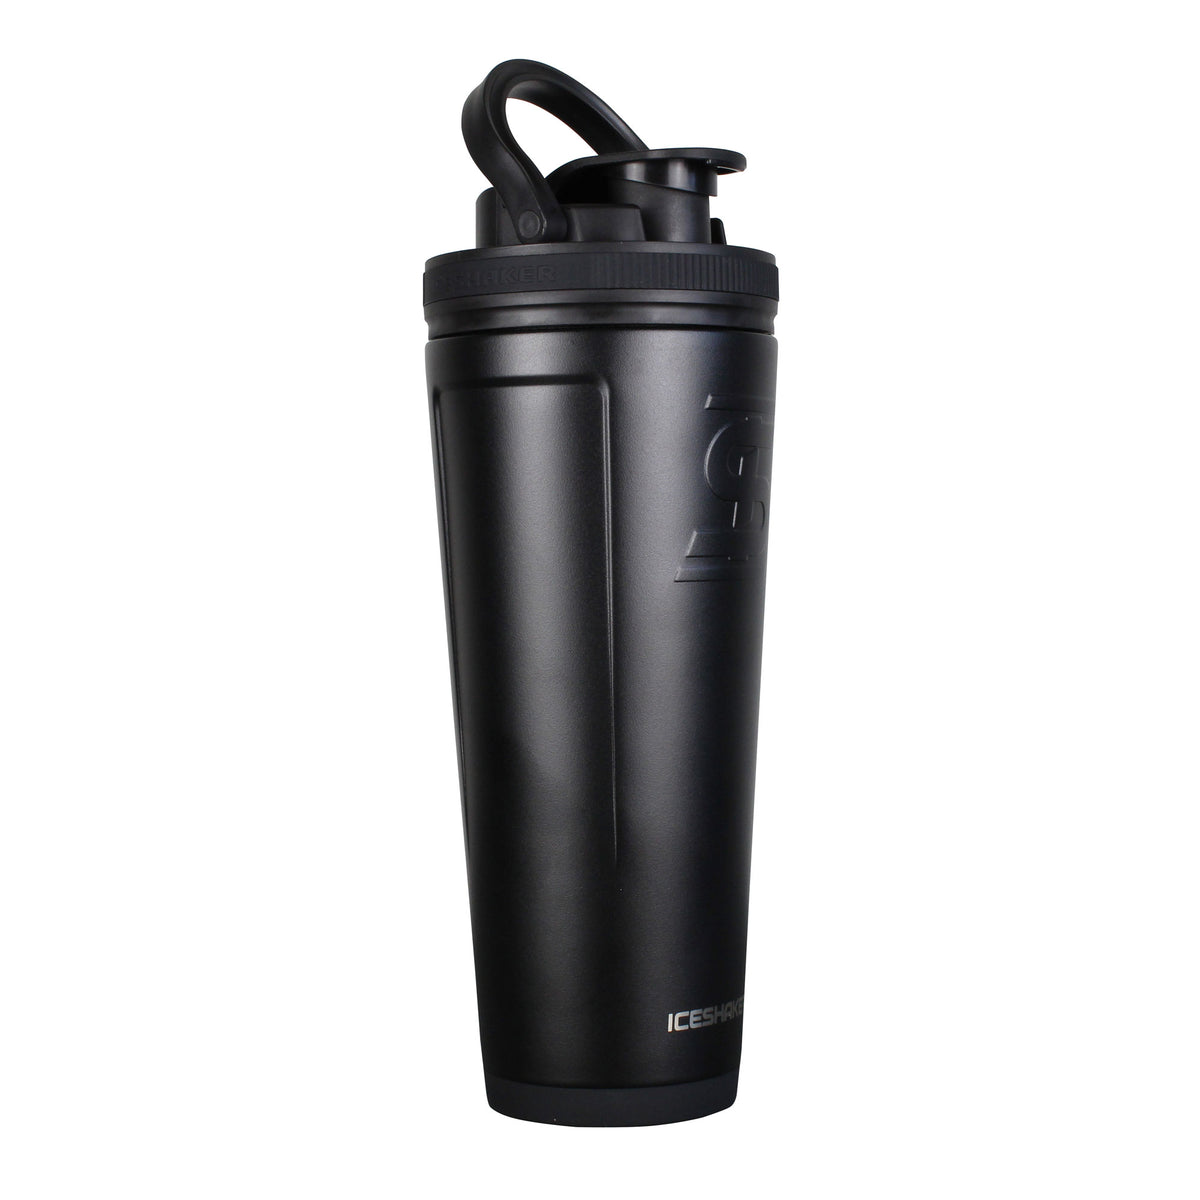 D.Y.A 12 Ounce Round Polypropylene Stainless Steel Protein Shaker Bottle